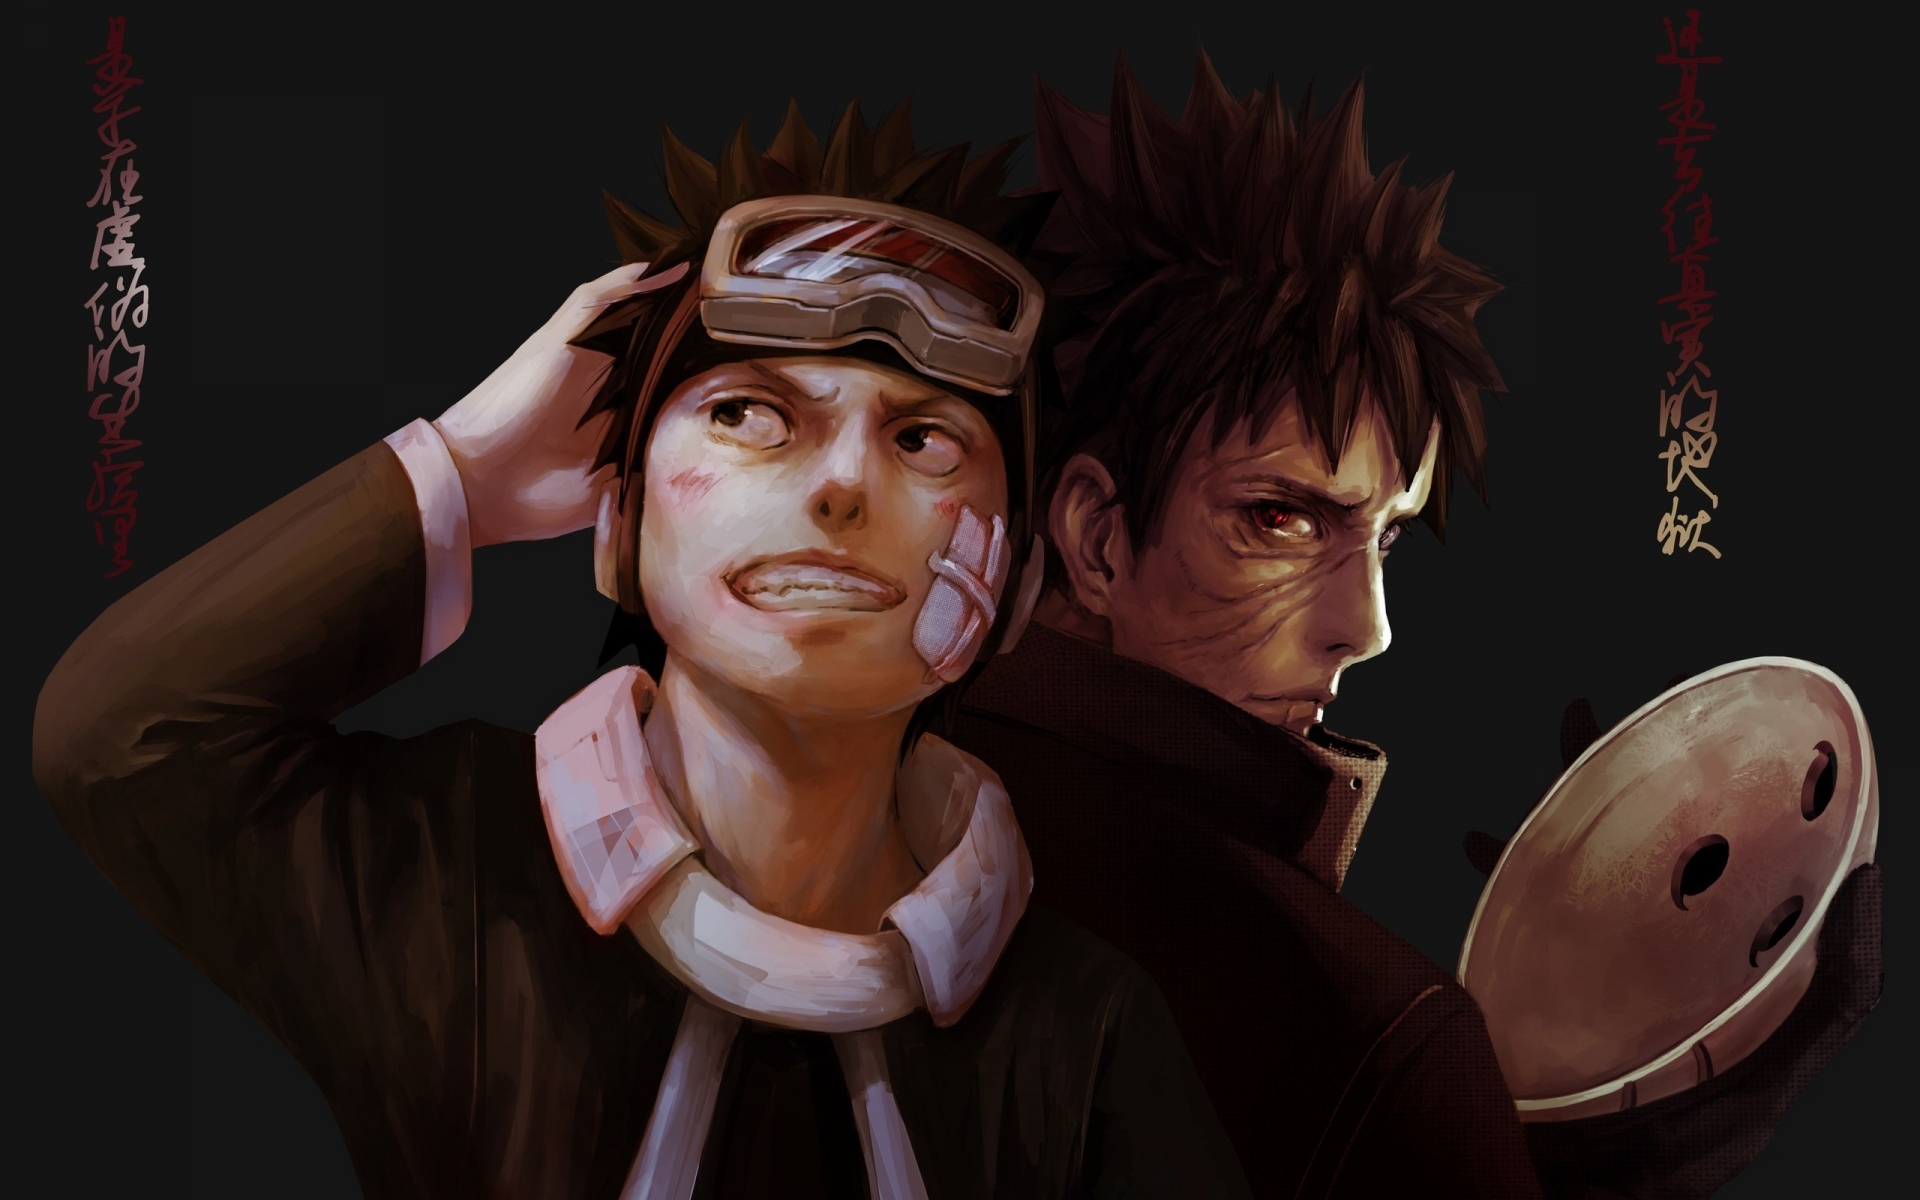 Naruto Style for 1920 x 1200 widescreen resolution